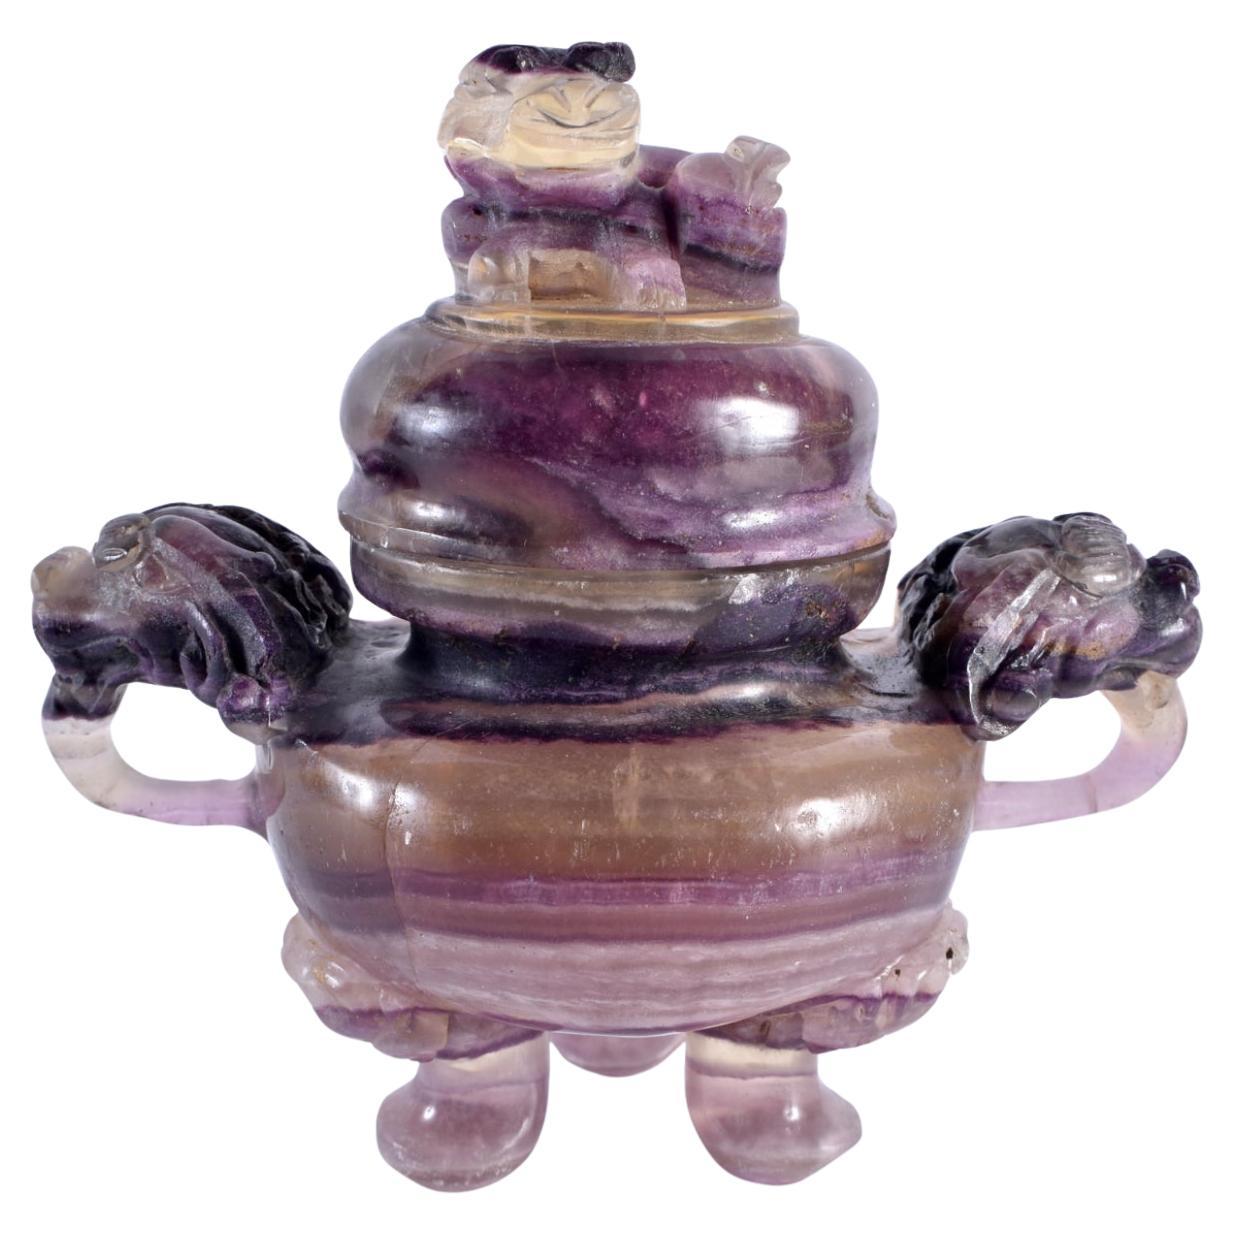 A Chinese amethyst carved censor and cover, Qing Dynasty, 19th century